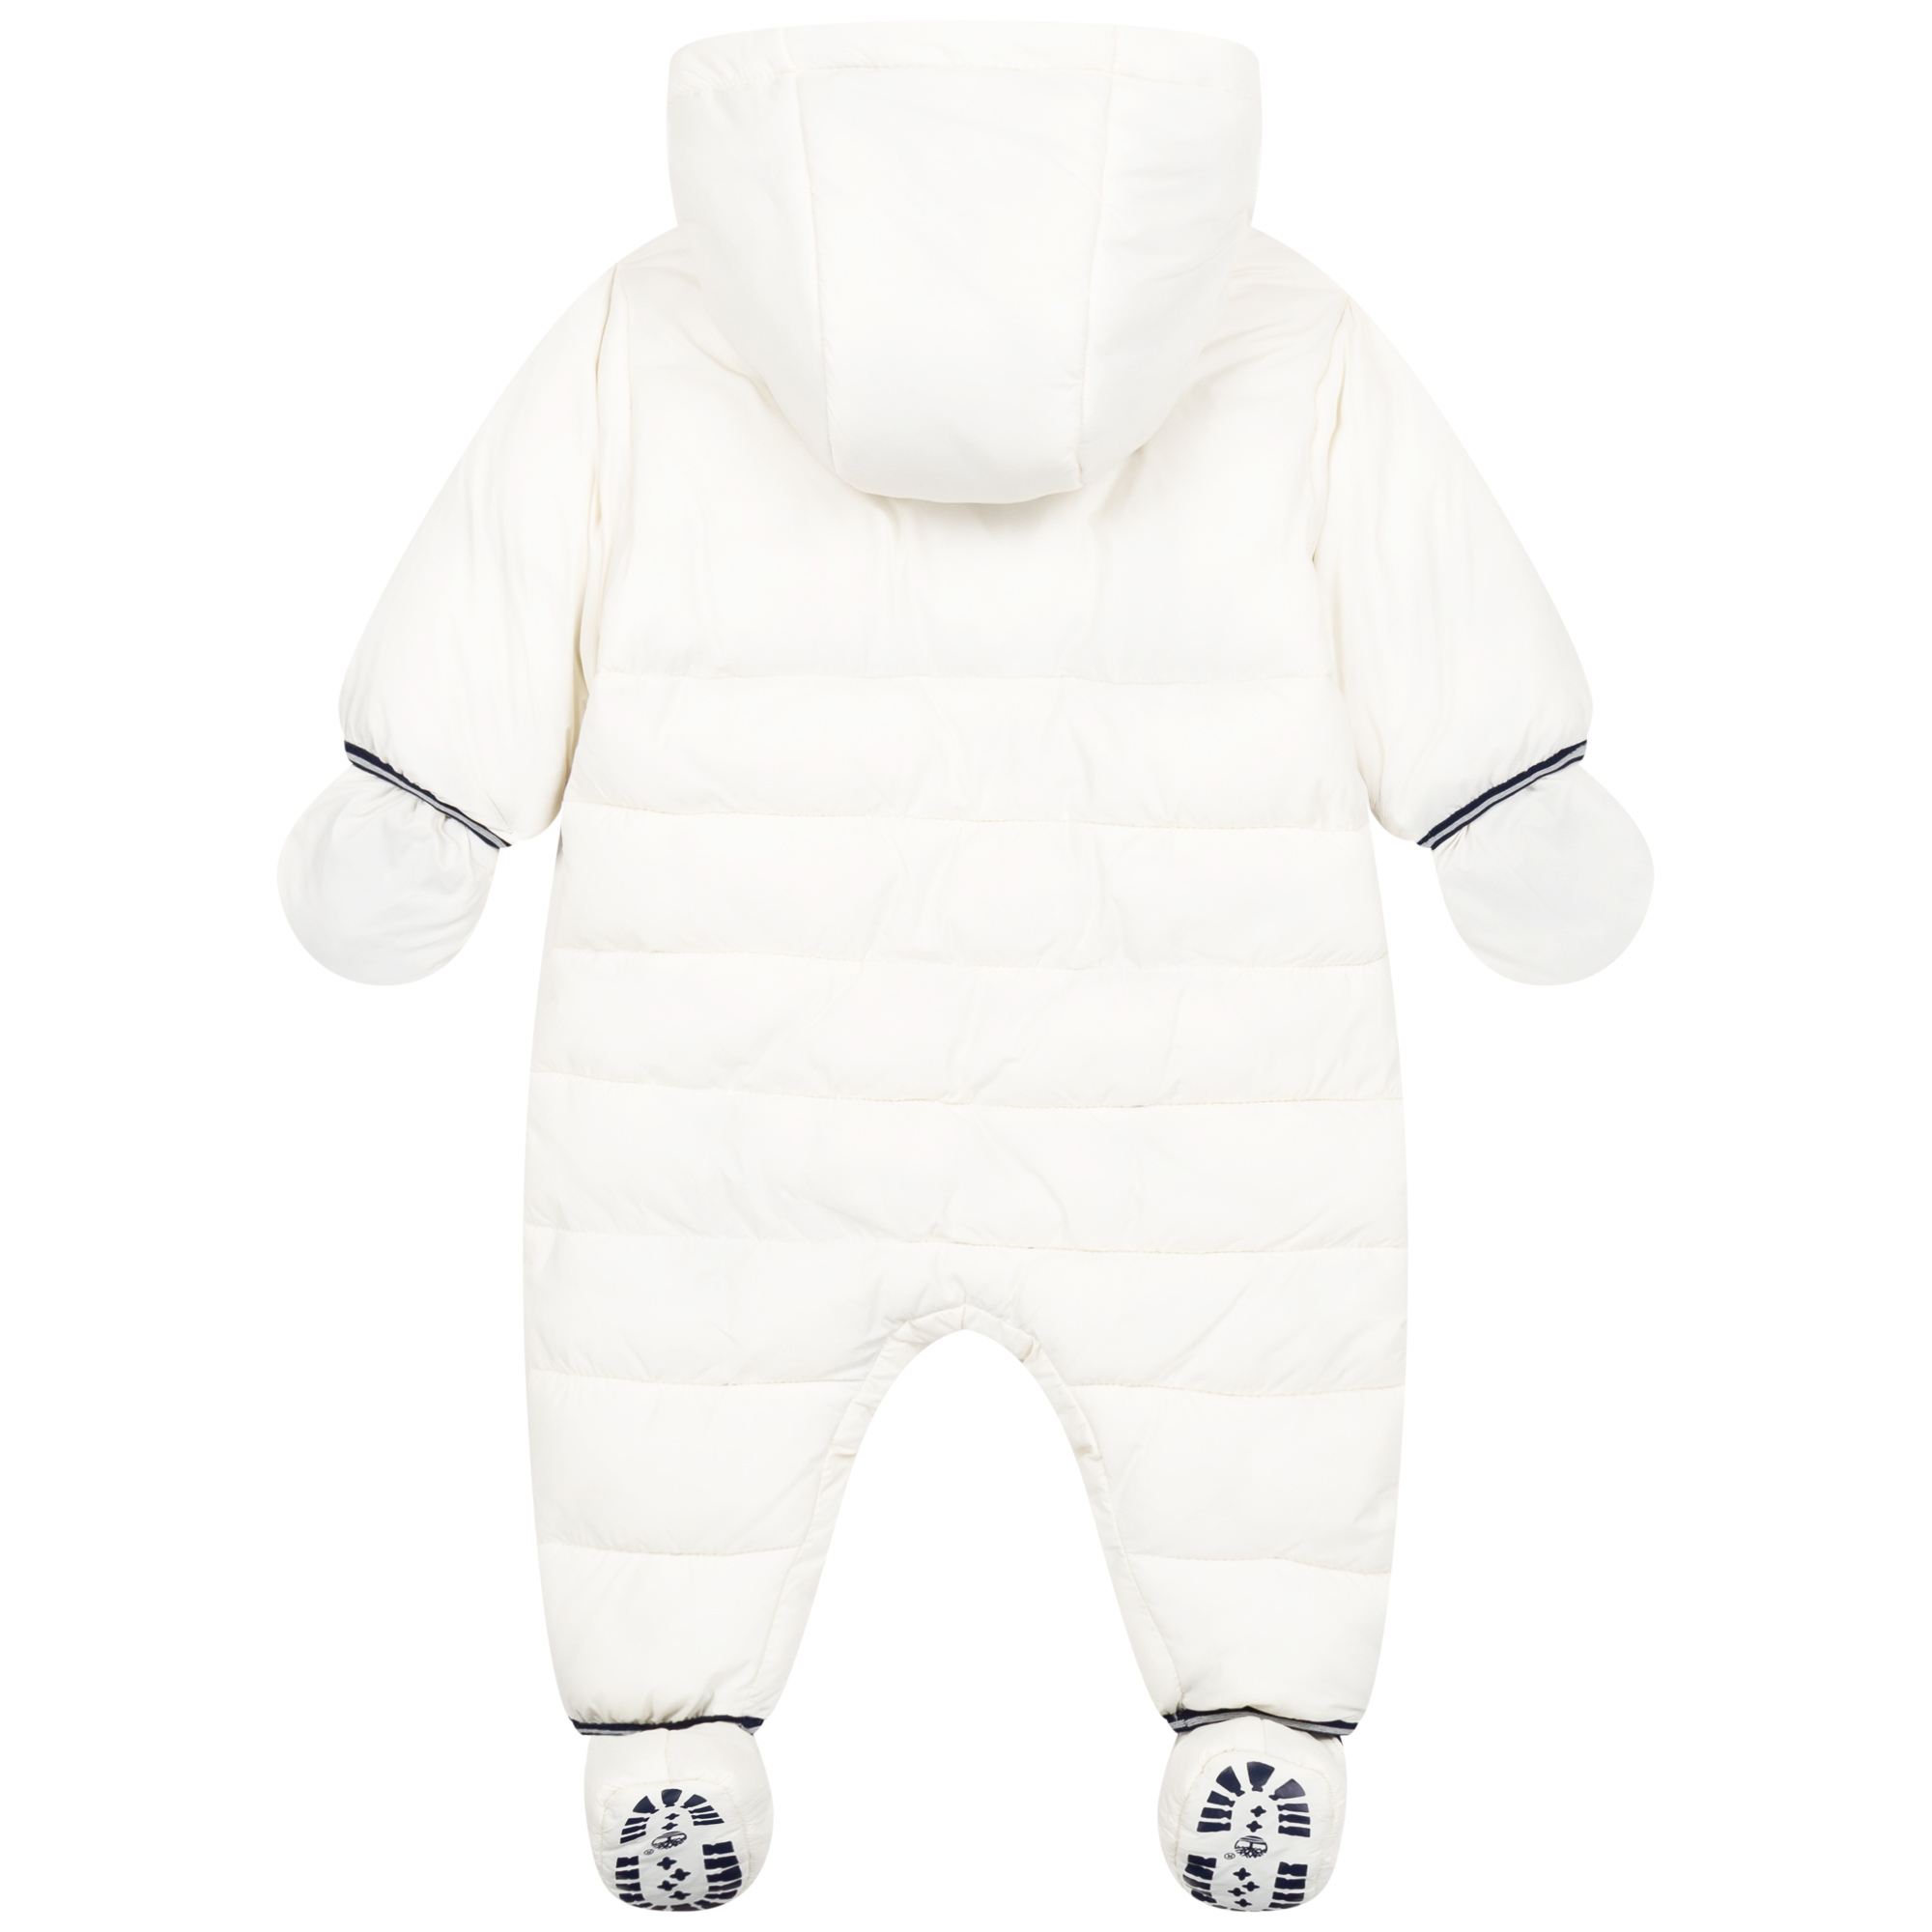 Water-repellent ski suit TIMBERLAND for BOY